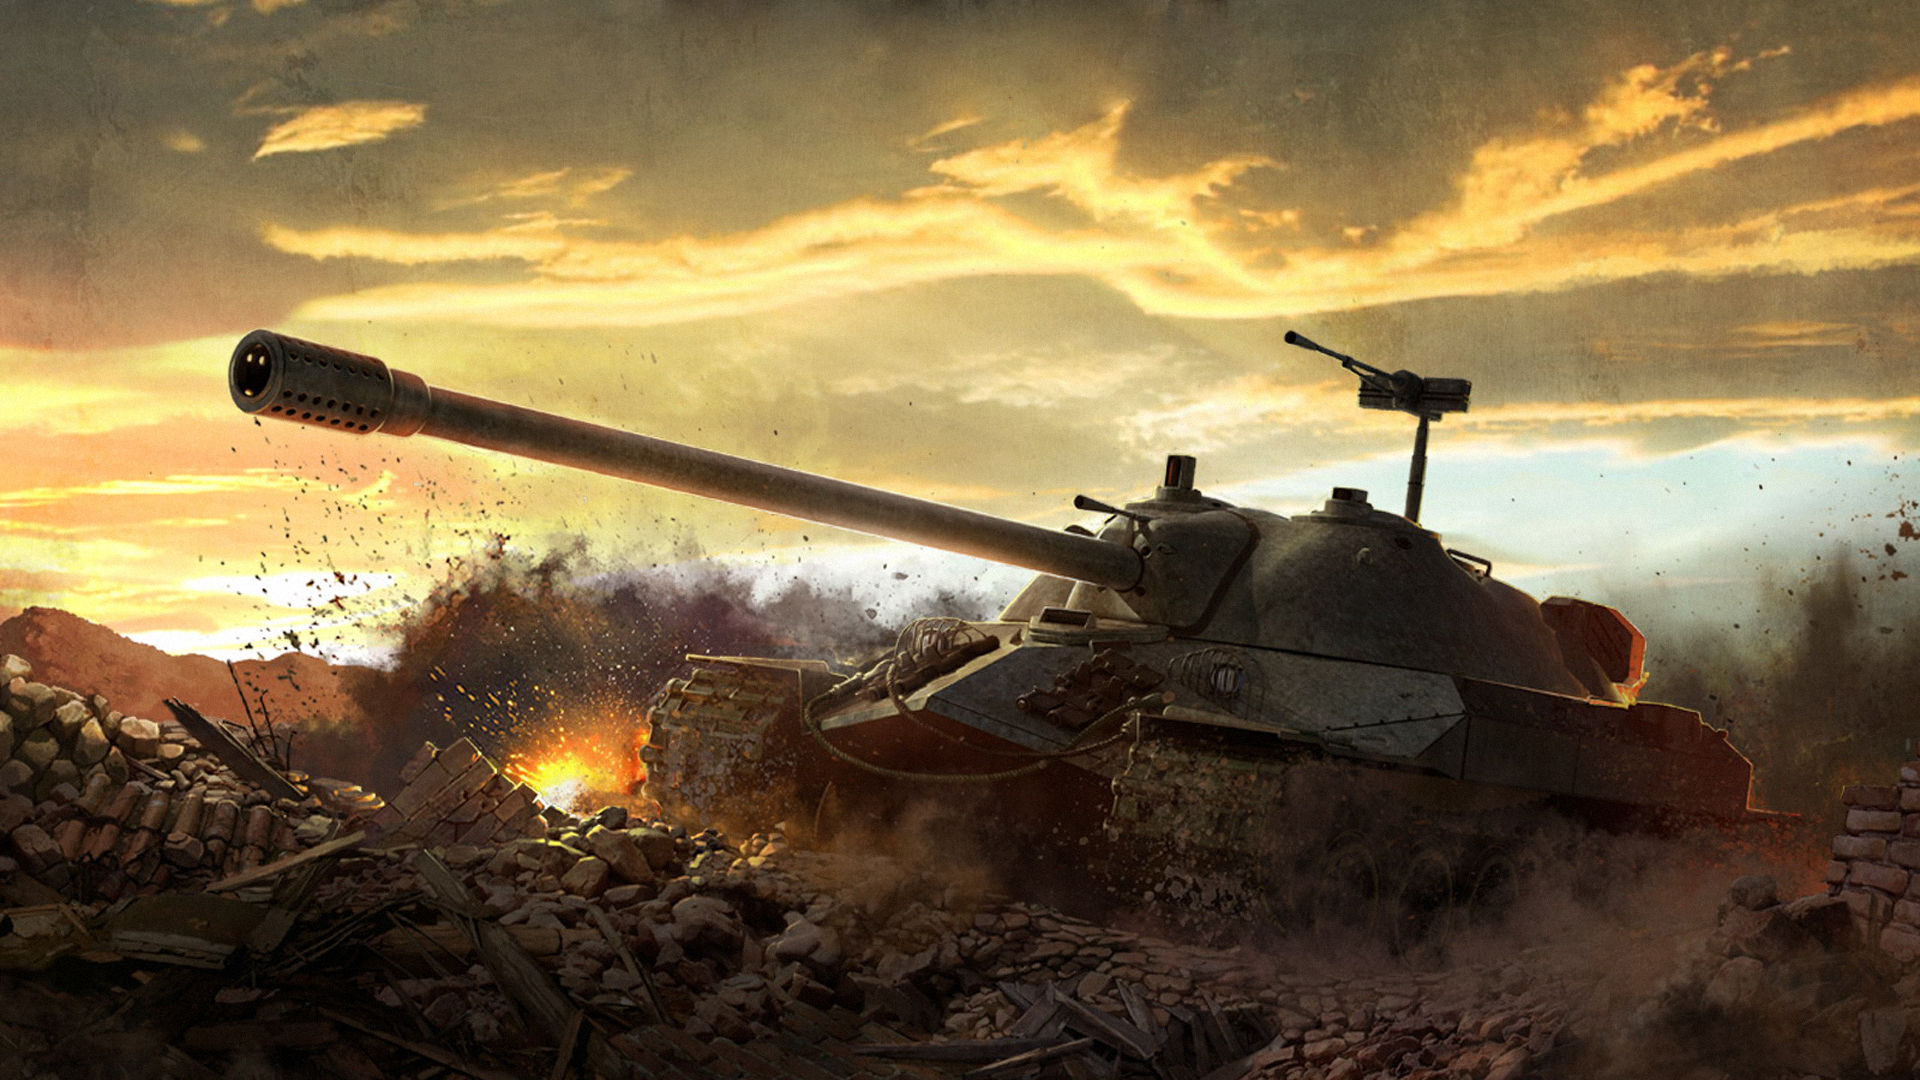 Army Tank Wallpaper In HD For